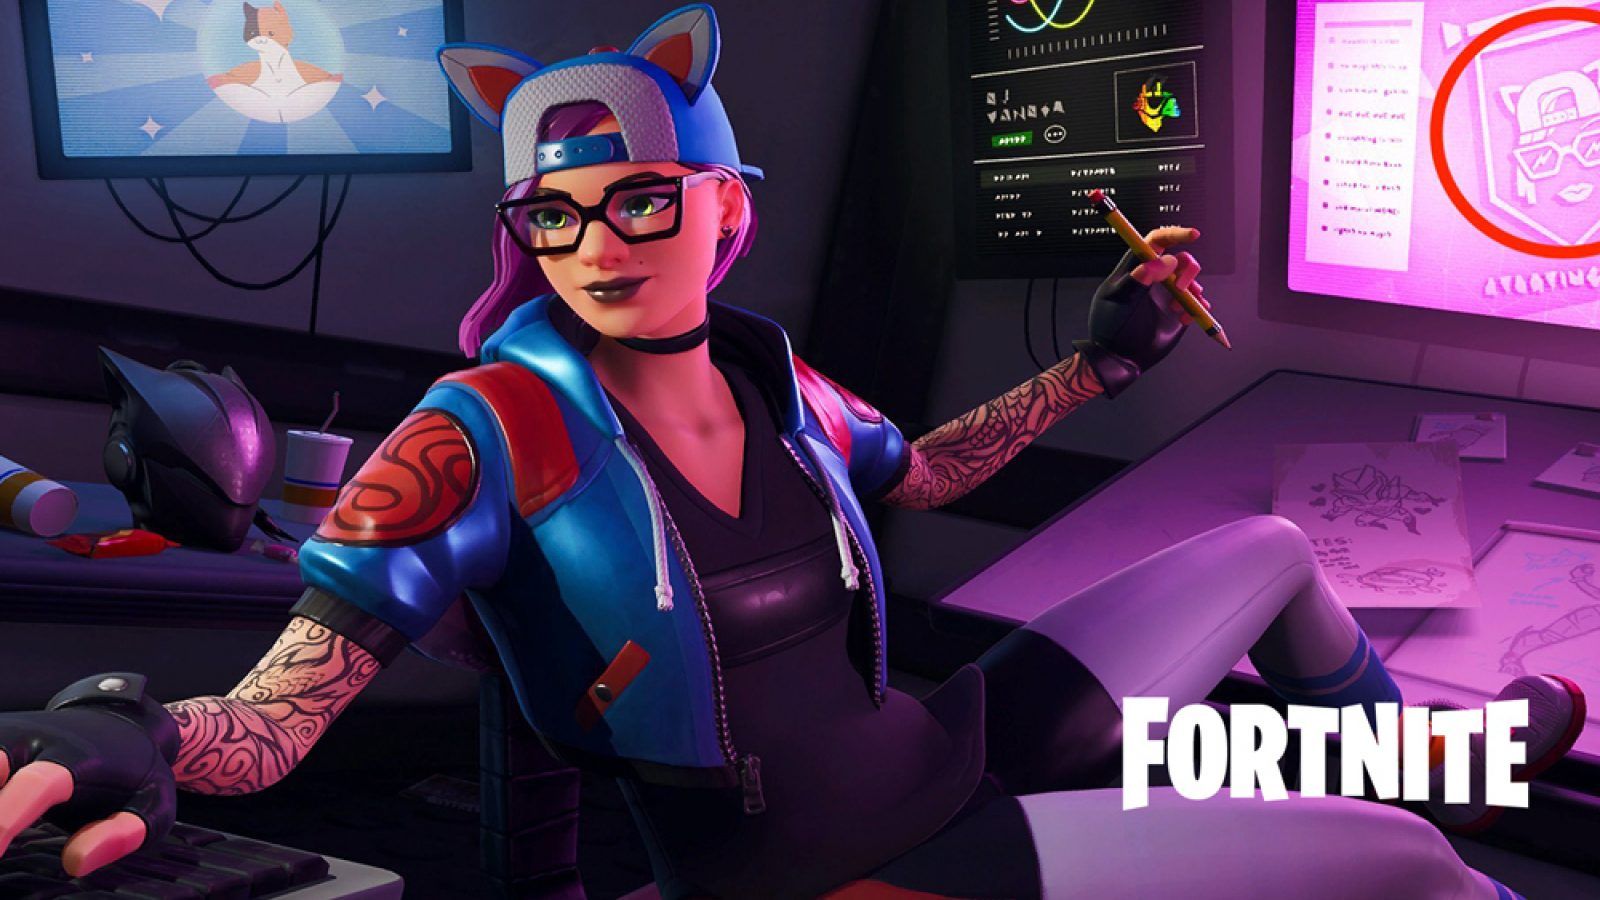 Fortnite-Season-10-will-force-players-to-upgrade-their-graphics-card.jpg